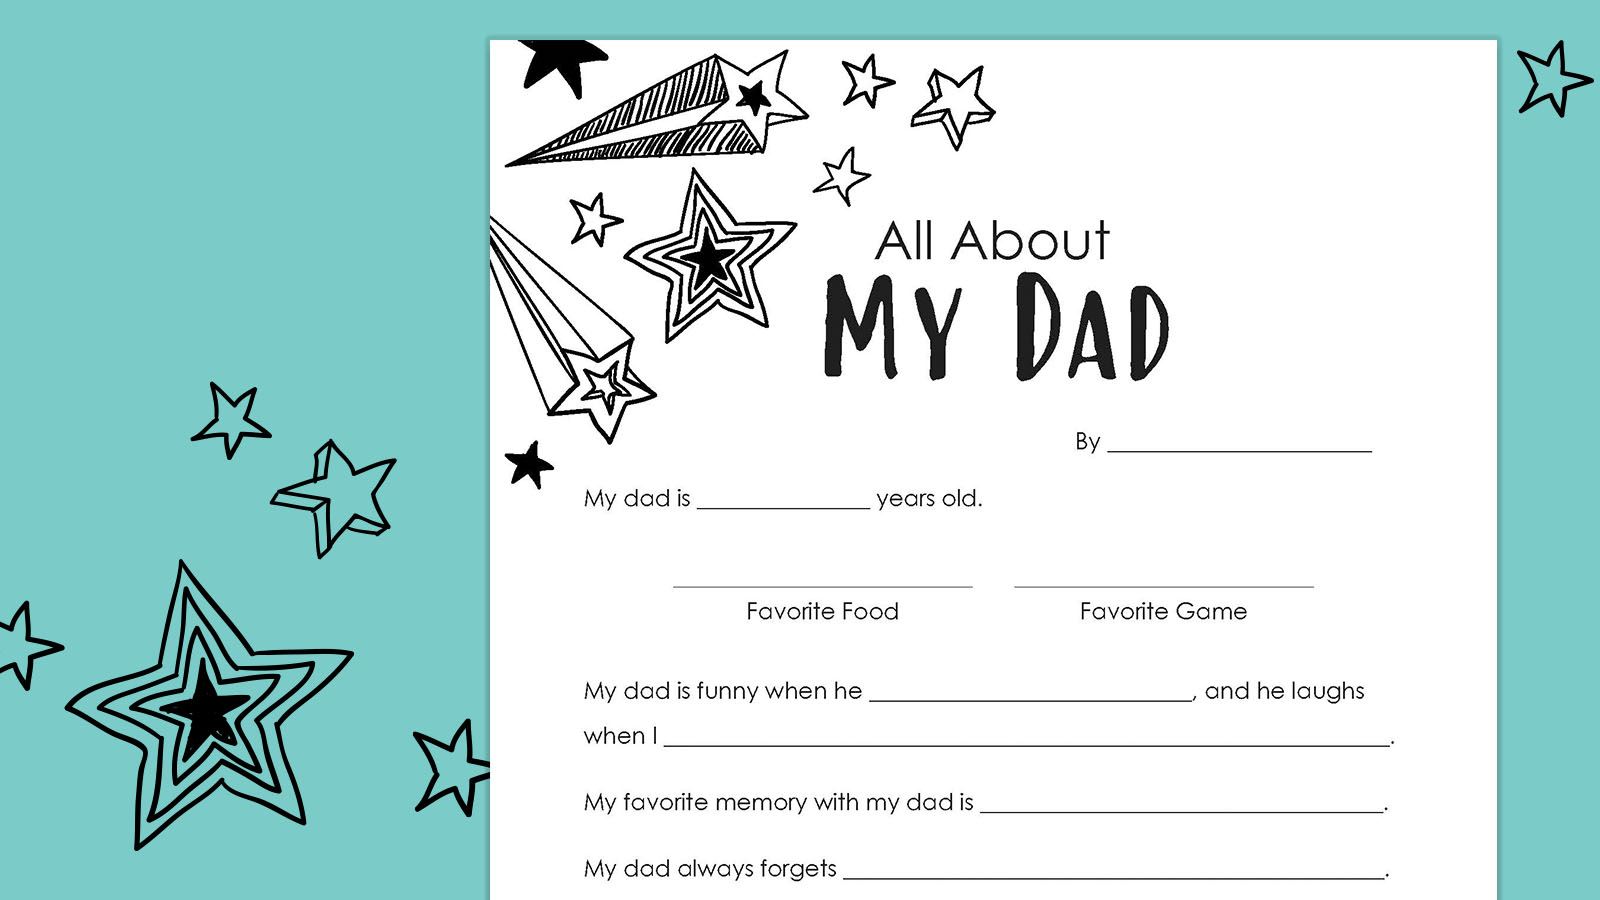 all about my dad father's day questionnaire on blue background with stars